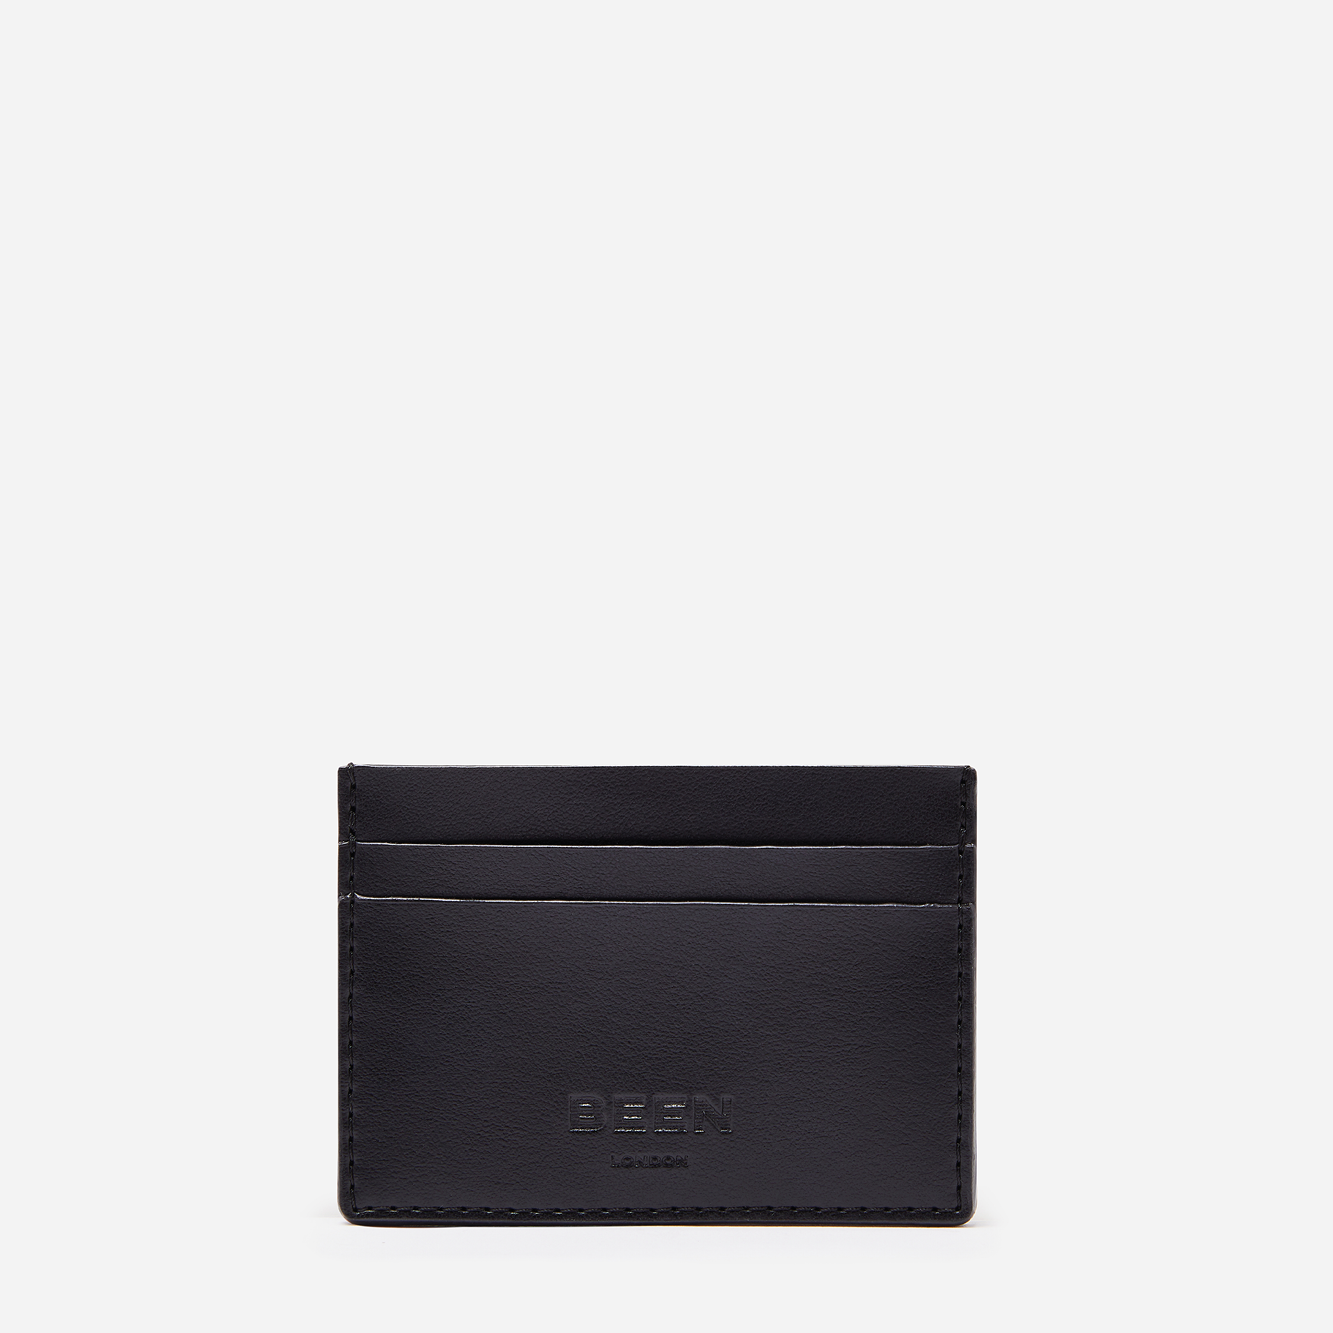 Vegan leather Wick Cardholder in Black onyx front view